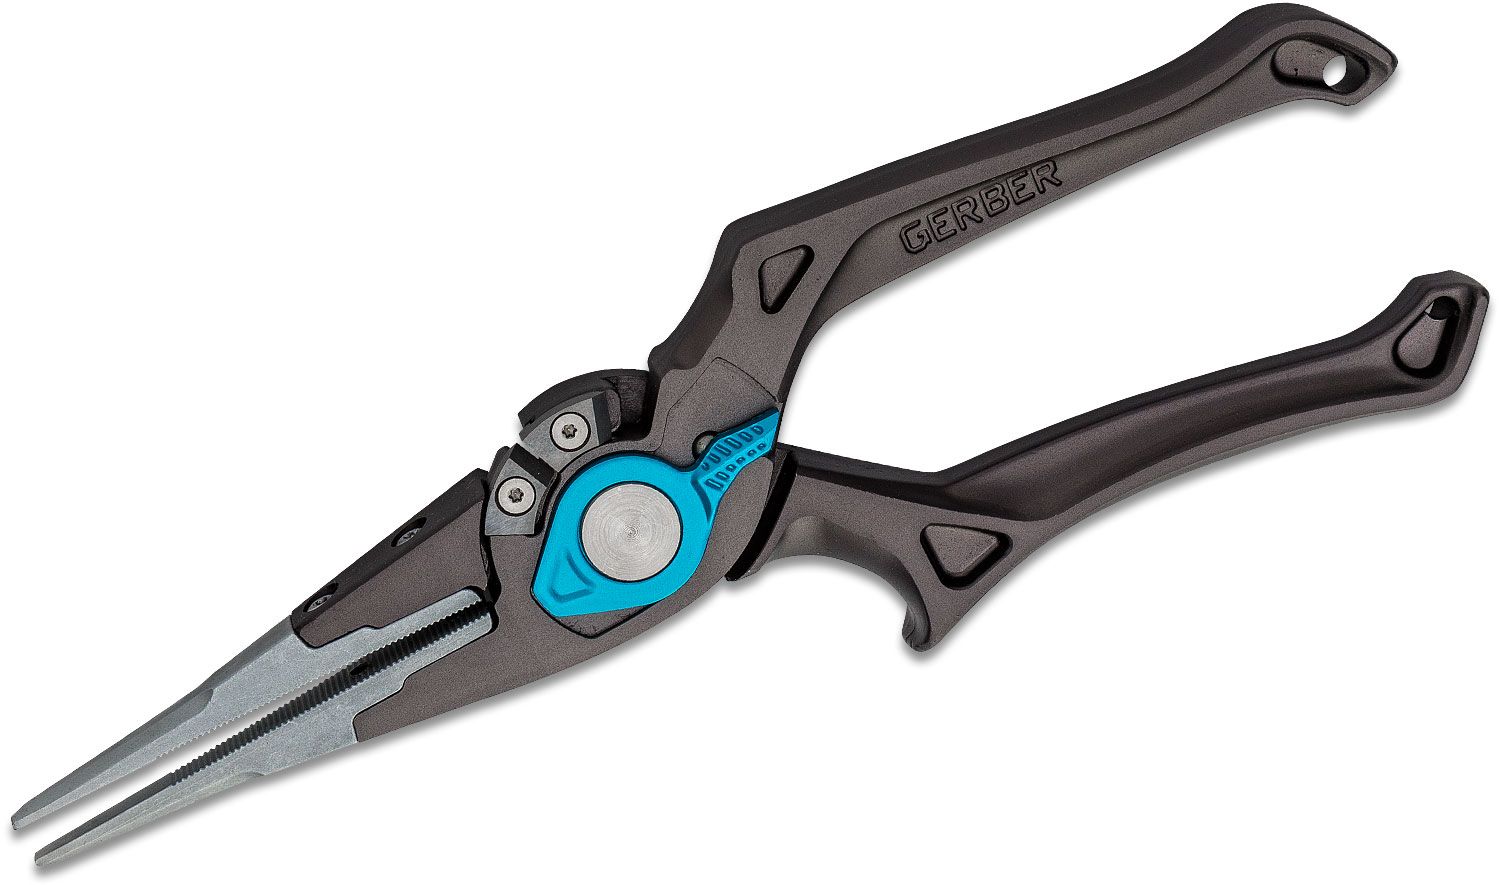 Gerber Fishing Series Needle Nose Magniplier Salt Rx Fishing & Angling  Pliers - KnifeCenter - 31-003597